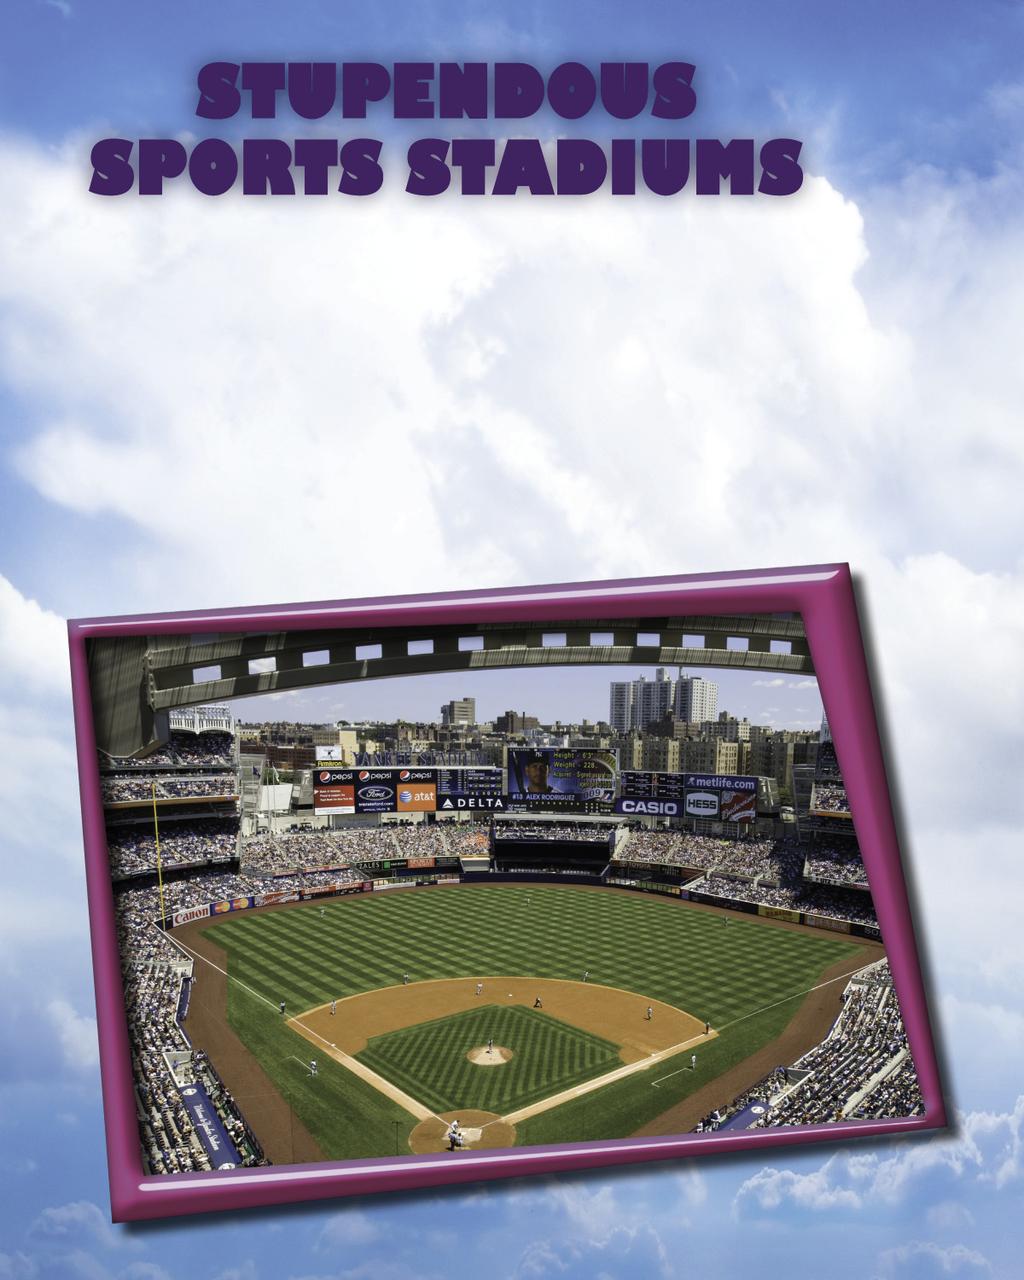 Stupendous Sports Stadiums Each year in the United States about 75 million people head to sports stadiums to watch Major League Baseball games.